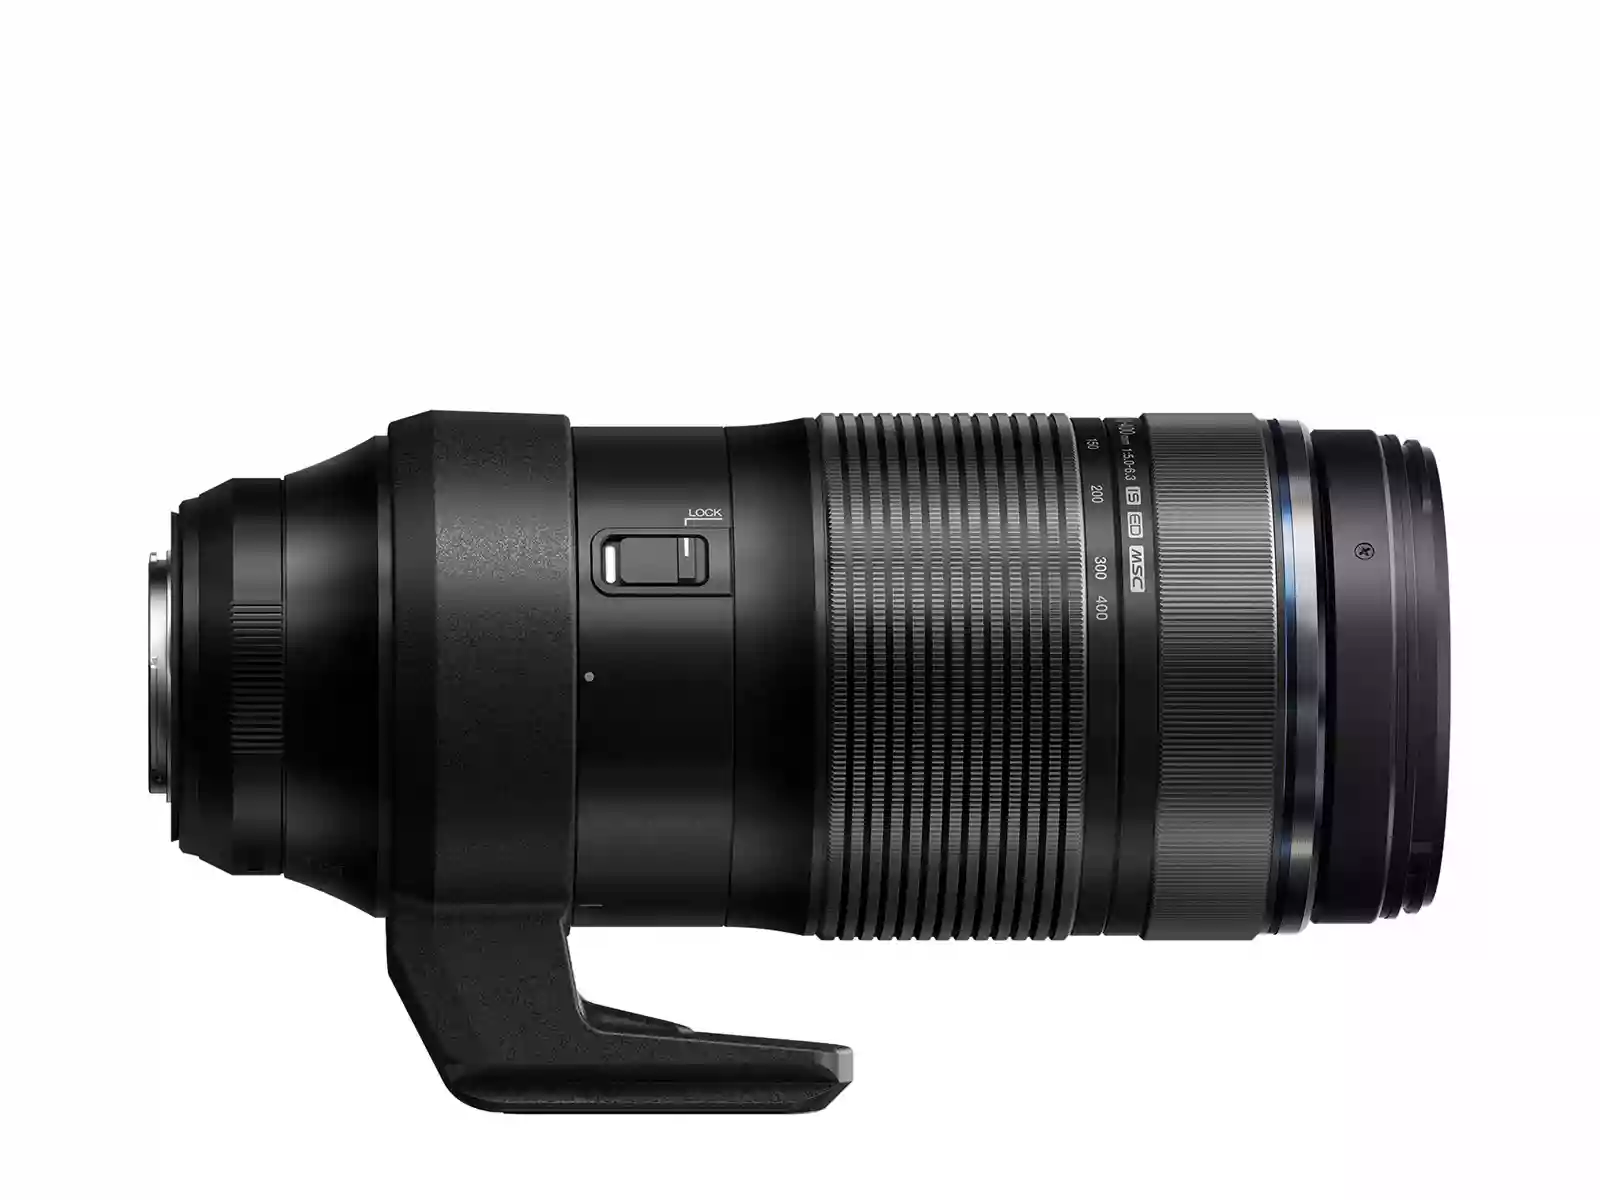 Olympus 100-400mm Lens And OM-D E-M10 Mark IV Review